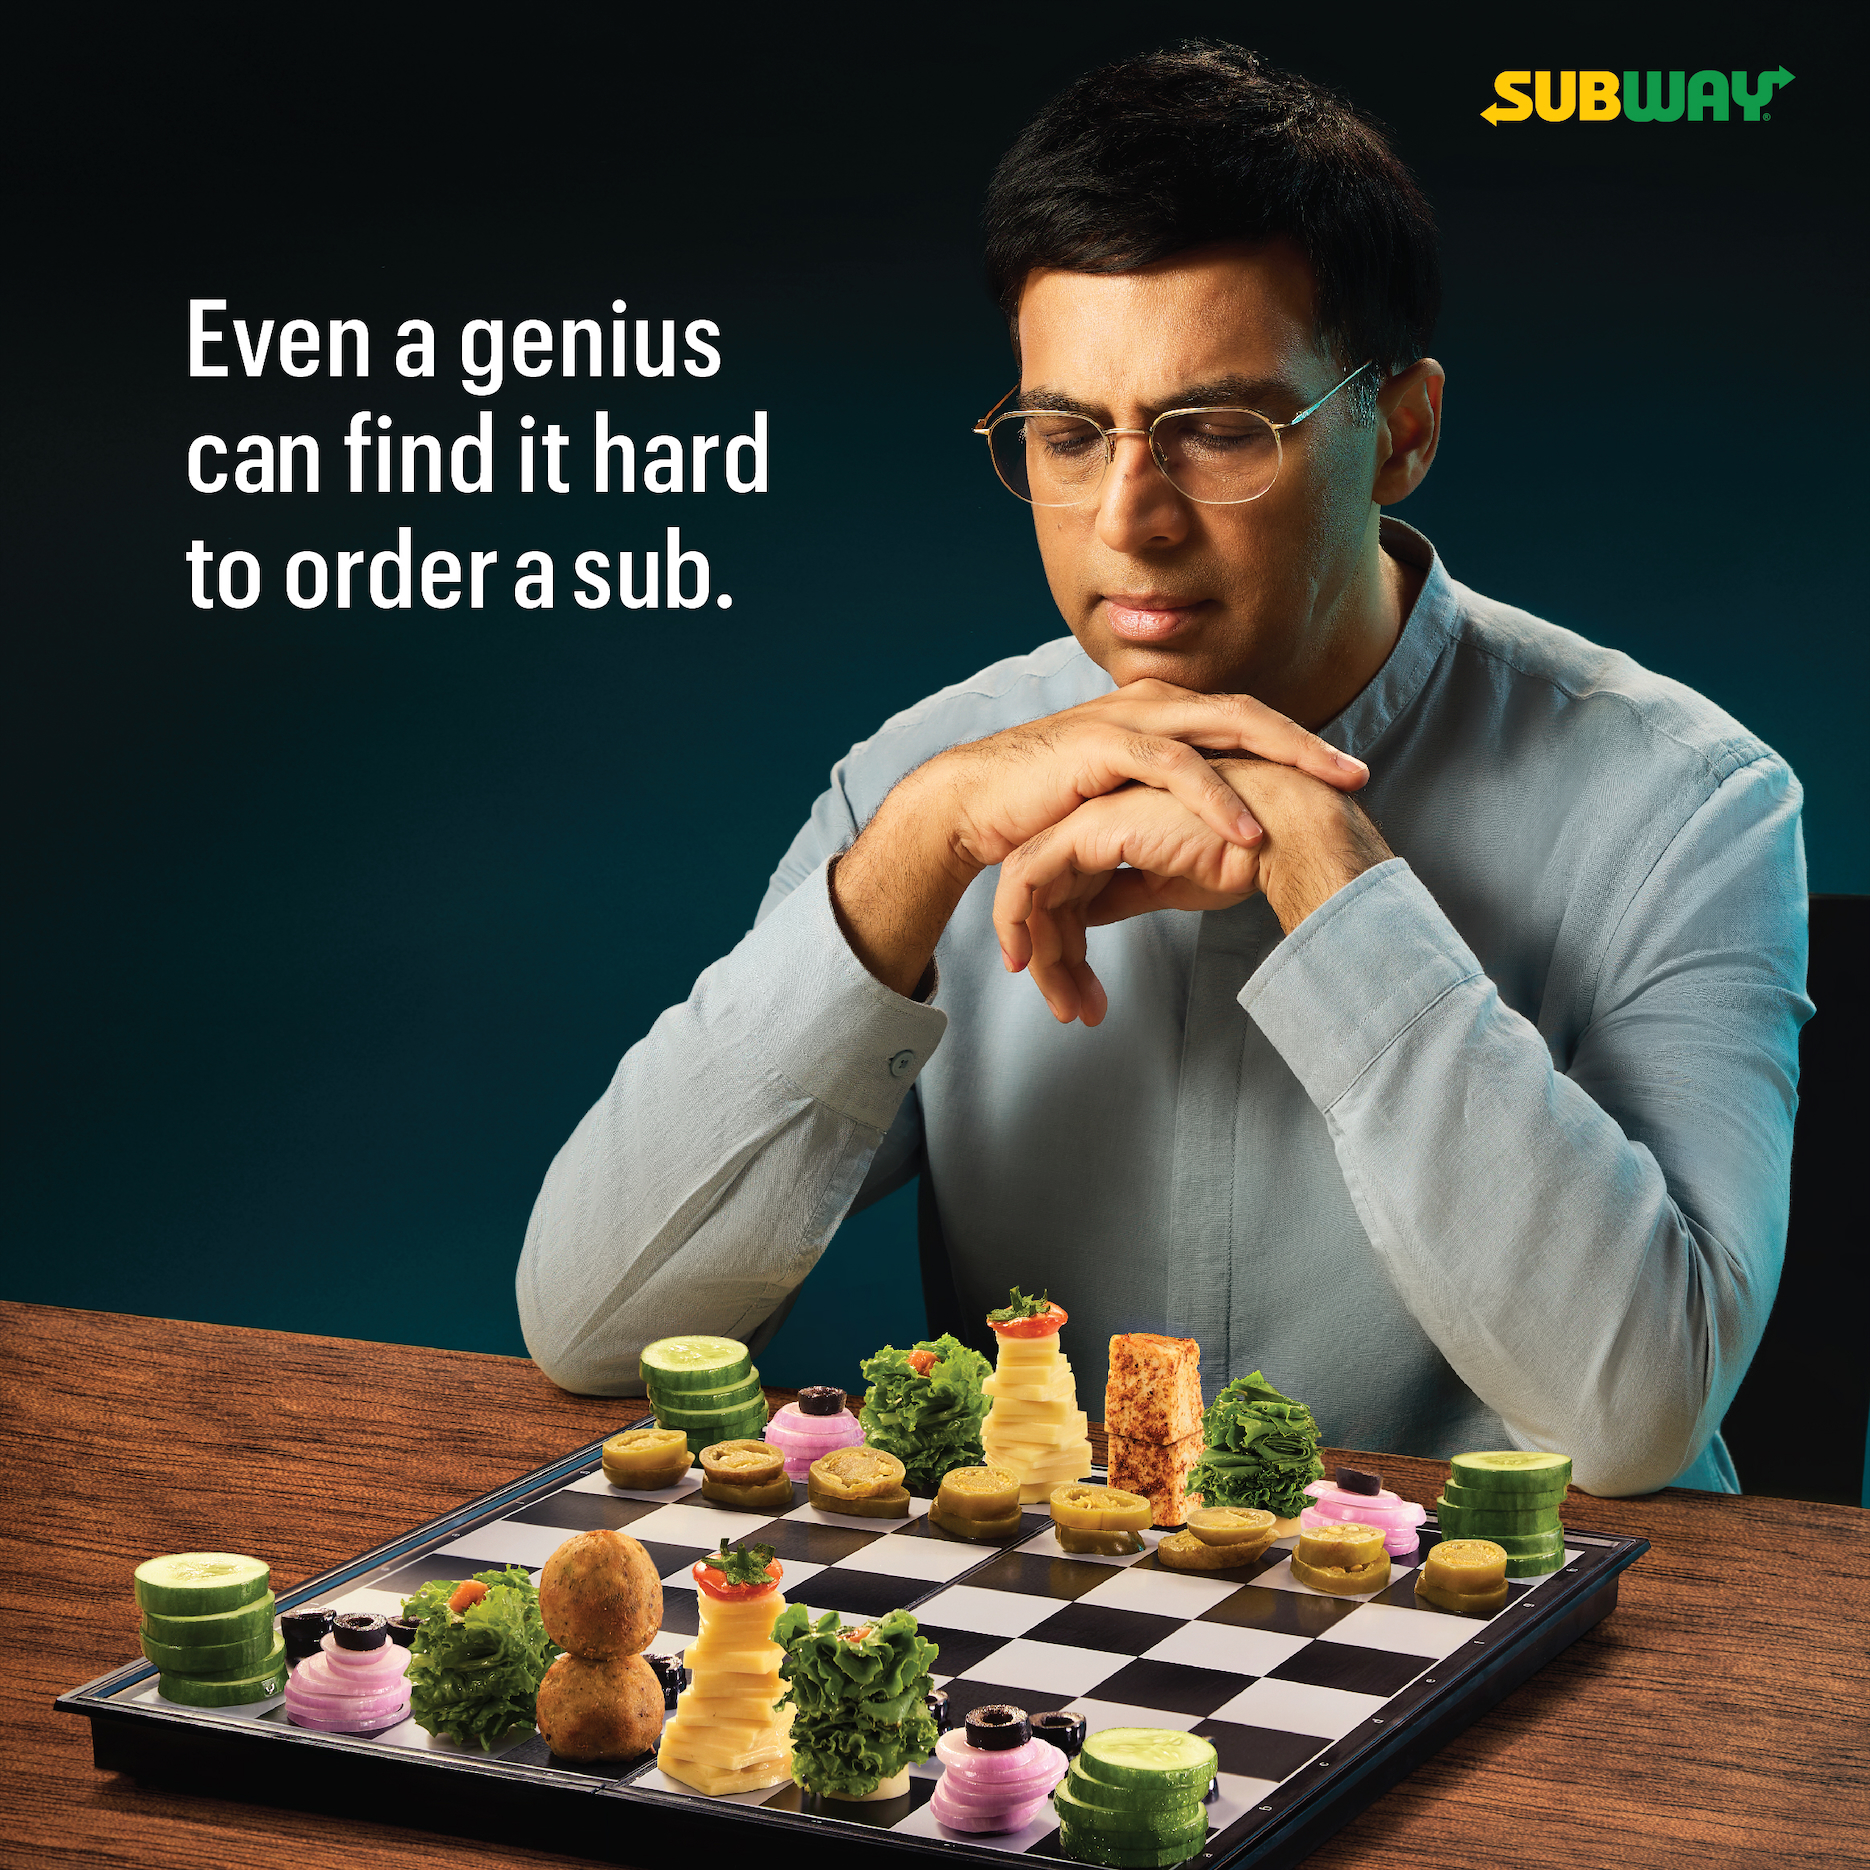 Subway aims to make ordering easier, gets Viswanathan Anand for